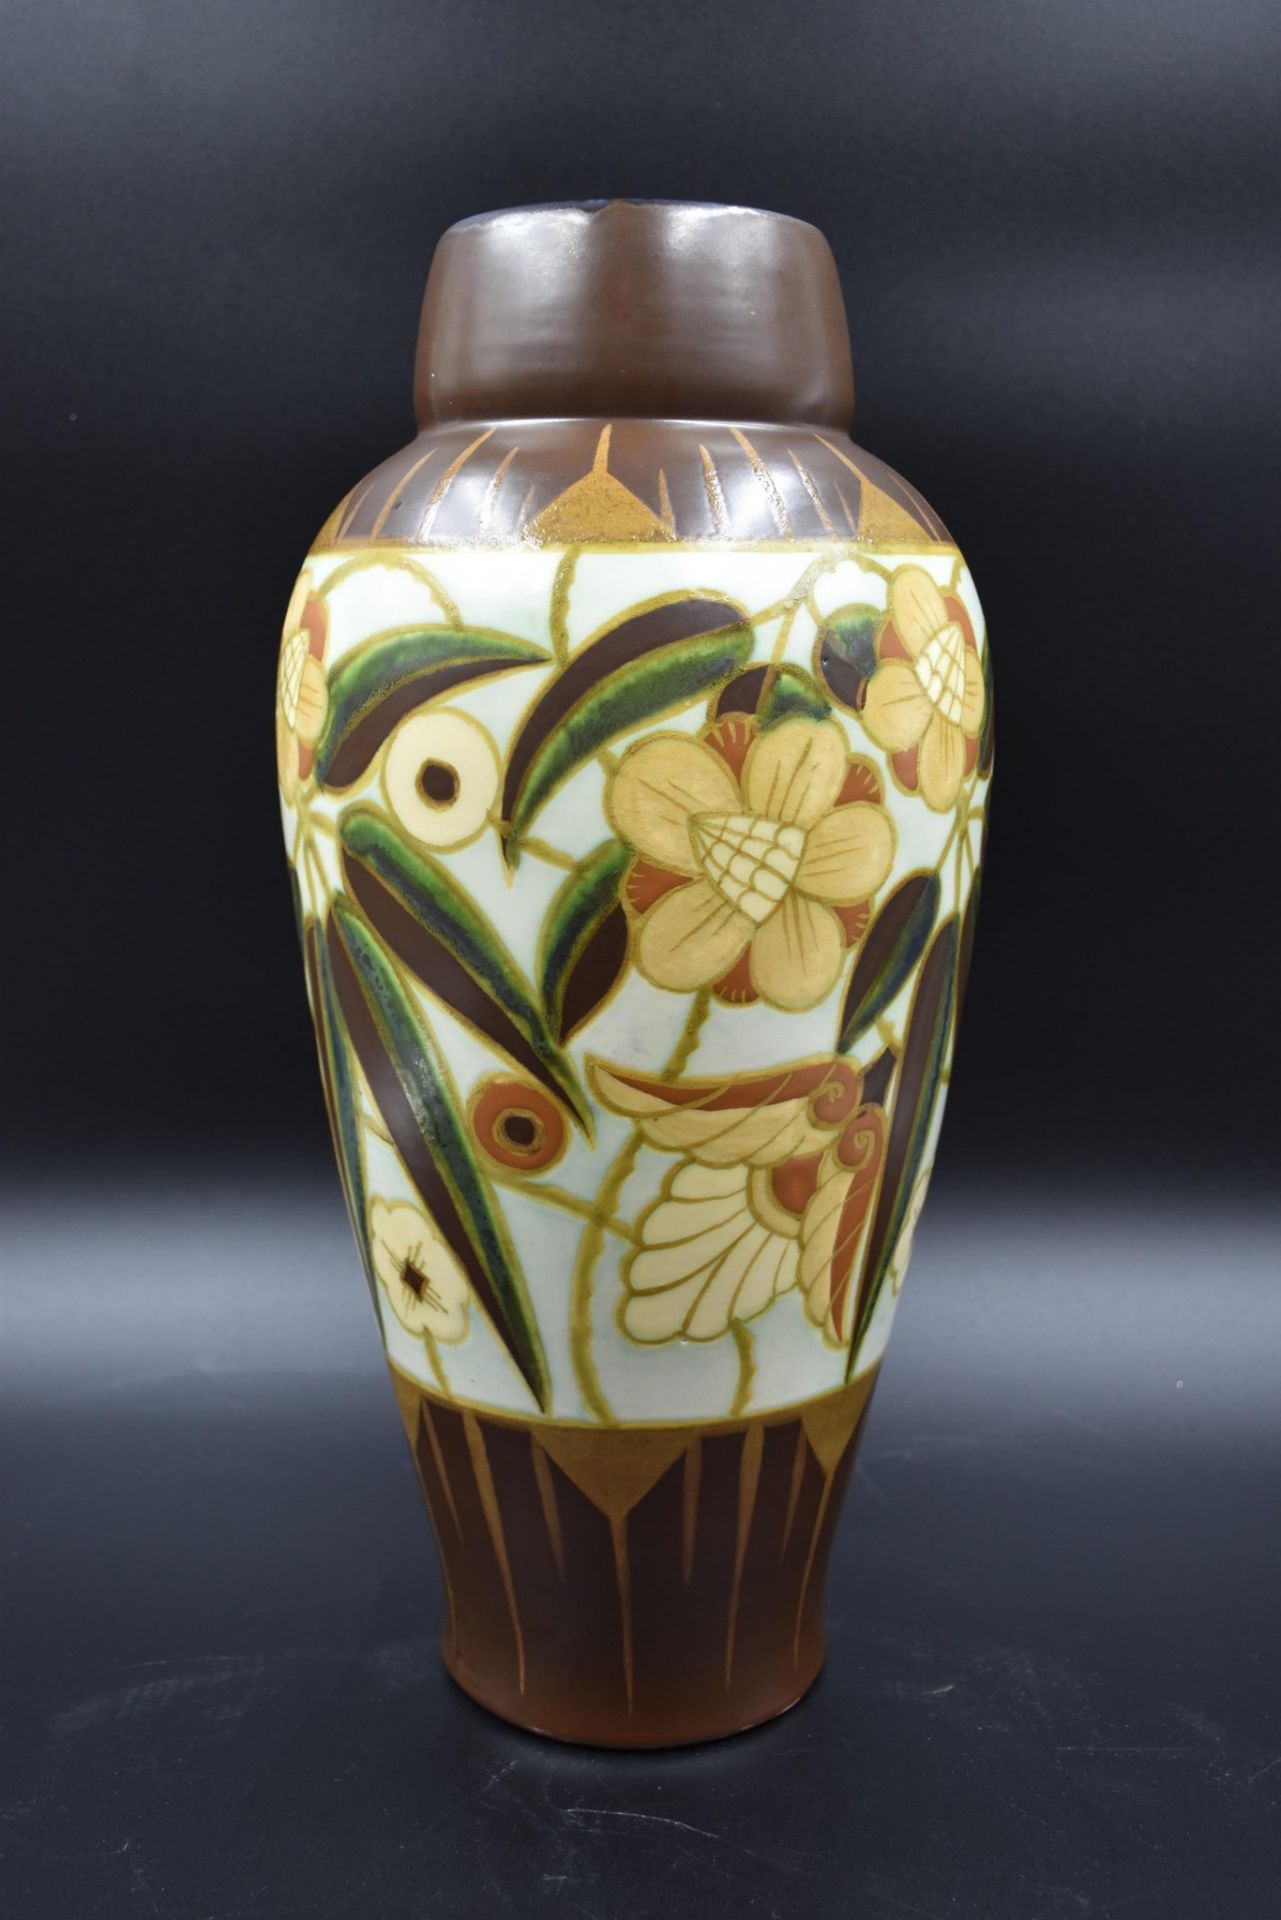 Boch Kéramis vase decorated with chestnut leaves. D.1847. Height : 41 cm. Small spot of